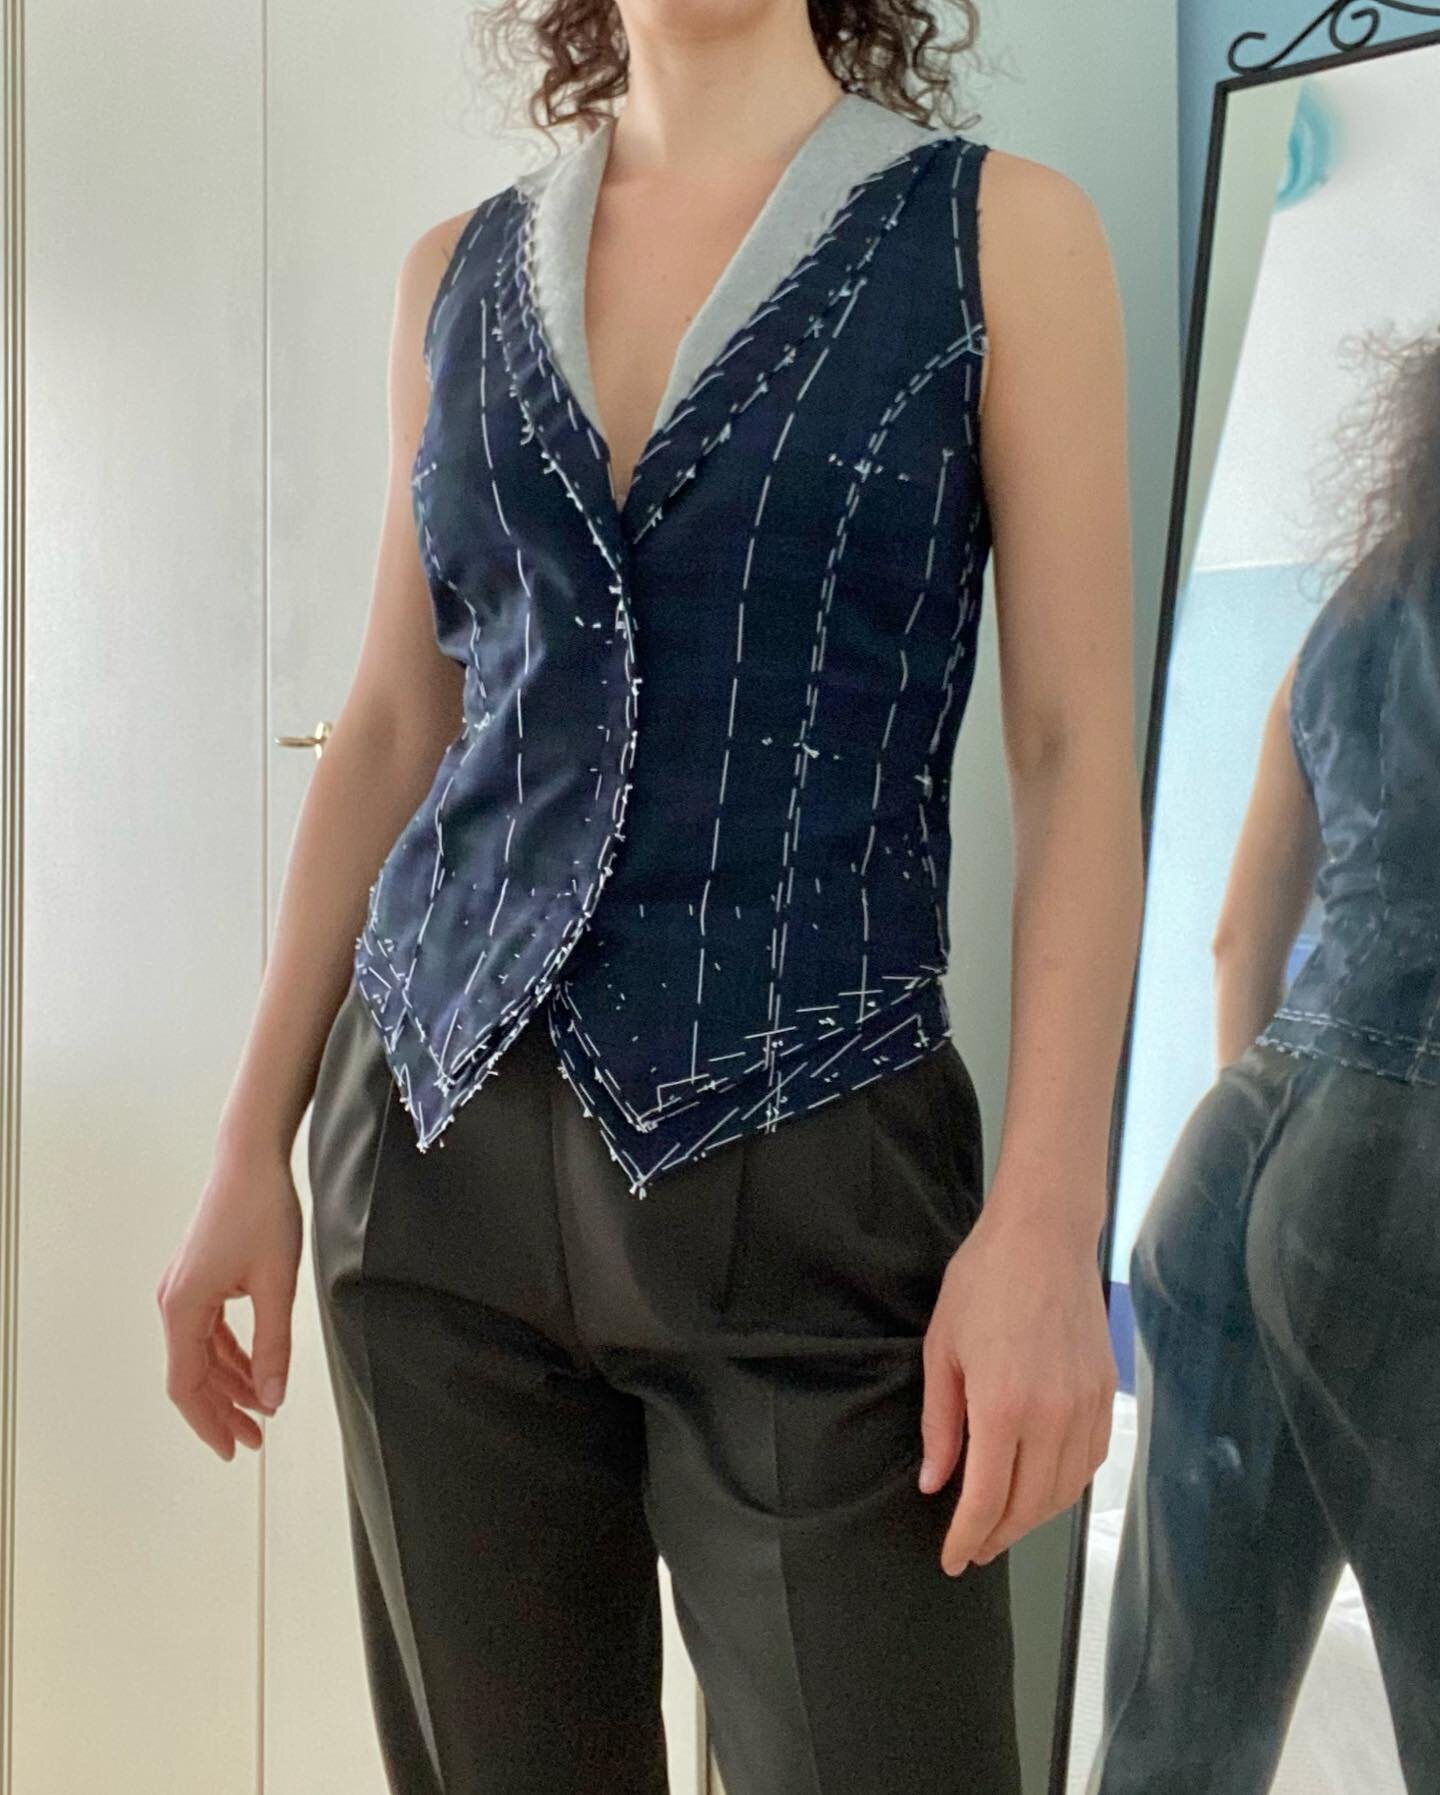 Waistcoats are one of my favorite pieces to tailor. 

They have all the cool tailoring techniques, but are significantly faster to make, easier to fit, and equally customizable.

They are the perfect introduction to bespoke tailoring techniques! I hi